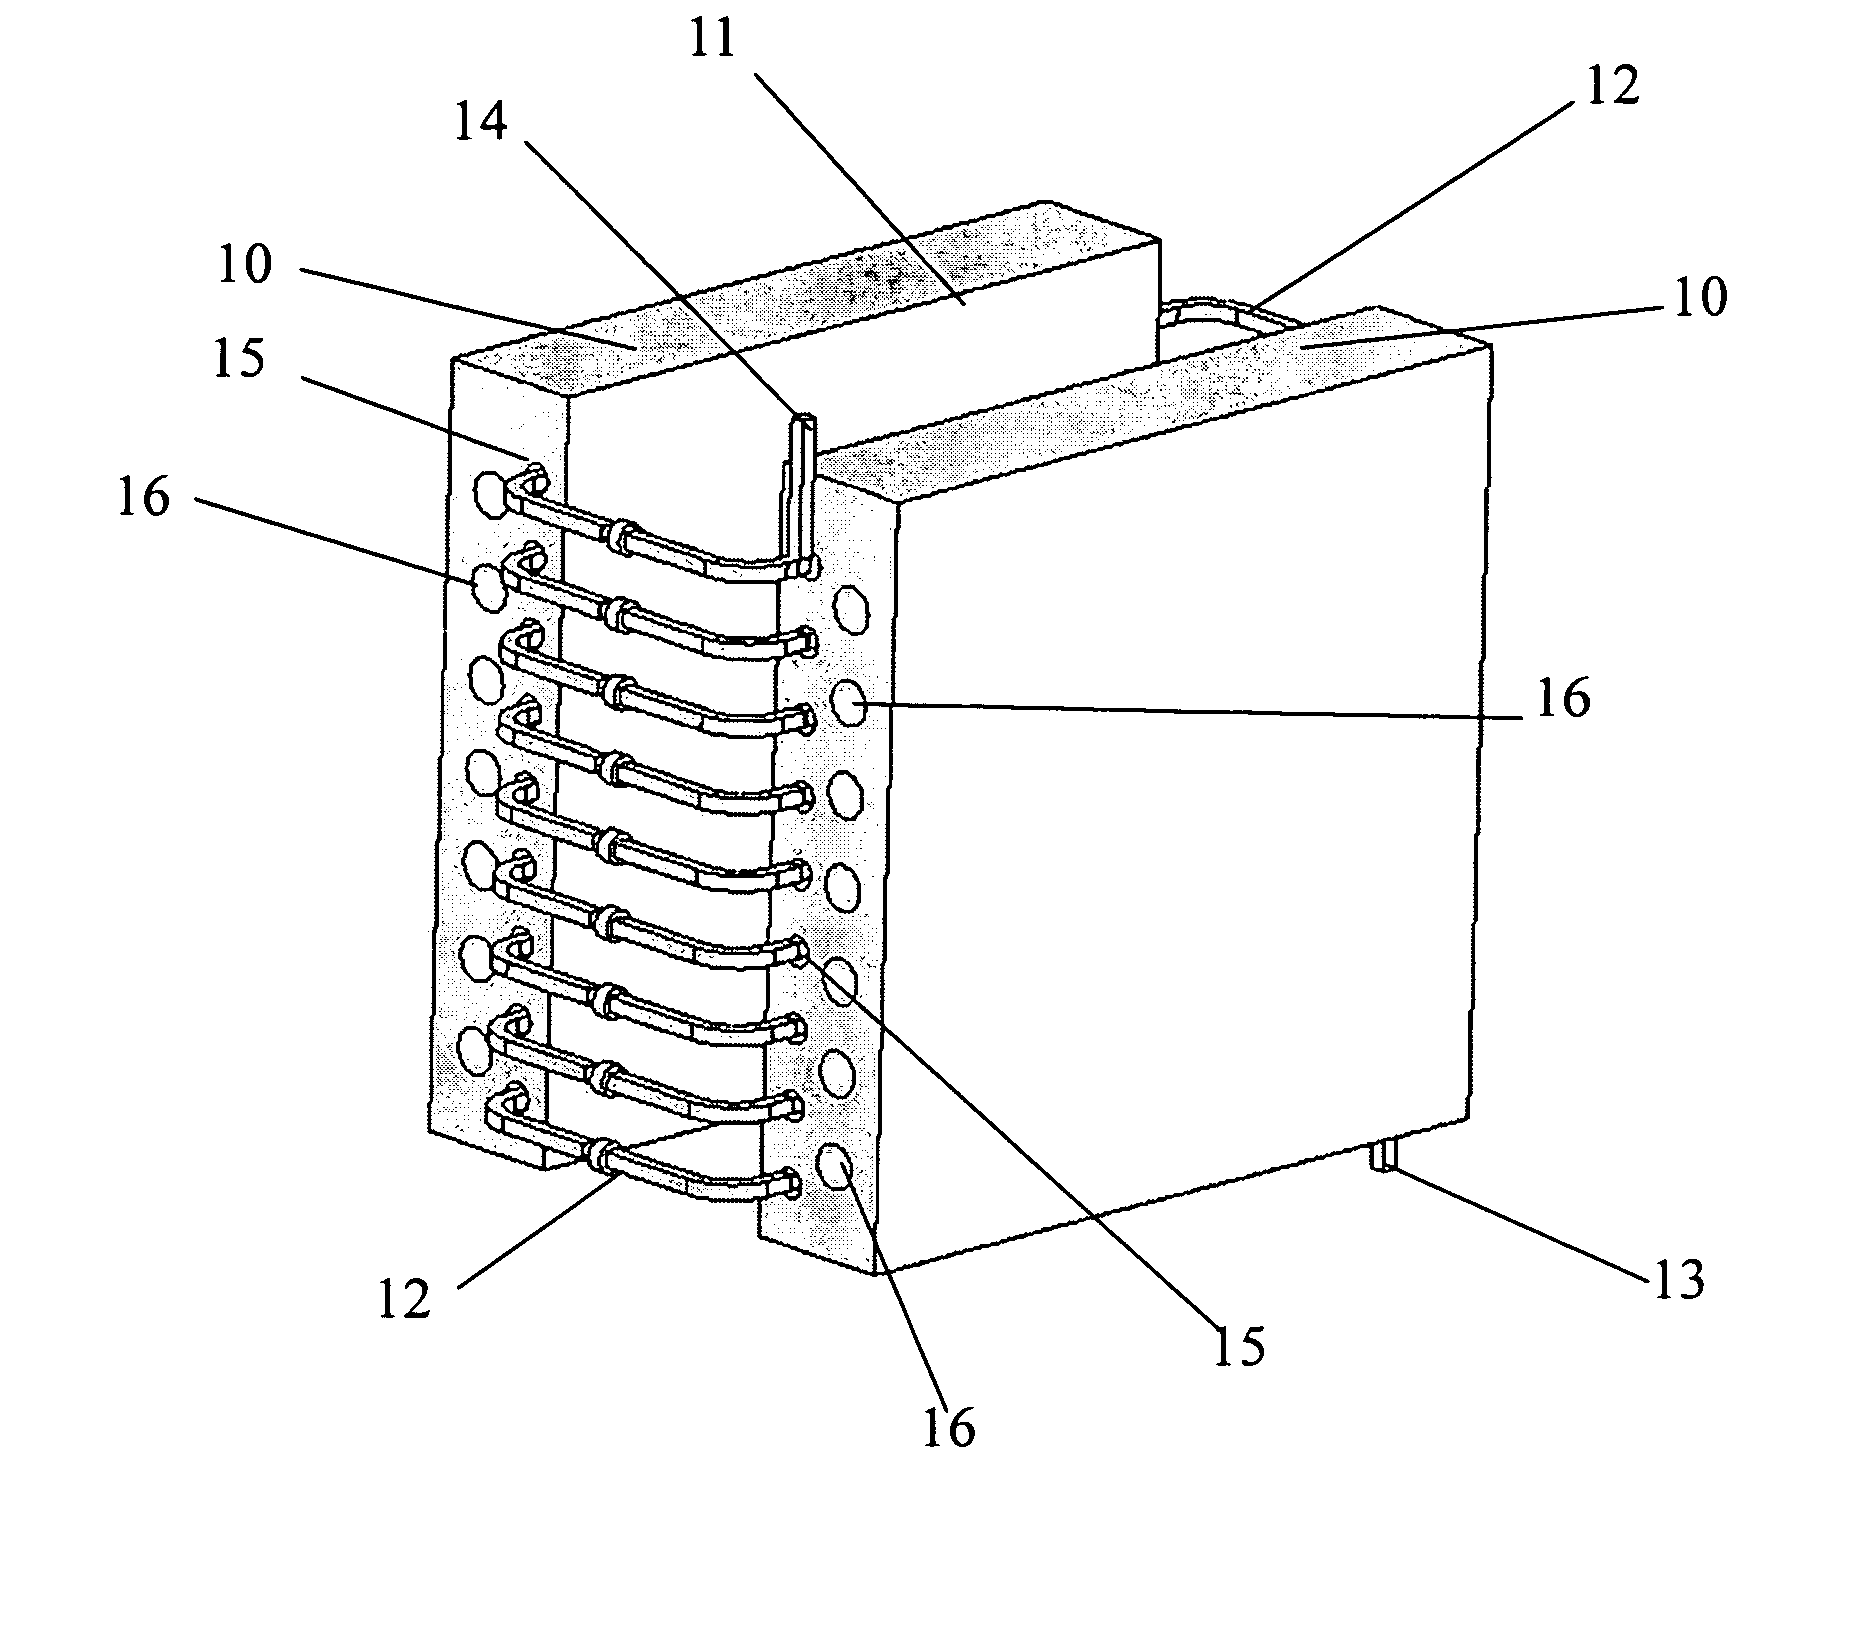 Method and apparatus for heating mold by high frequency current